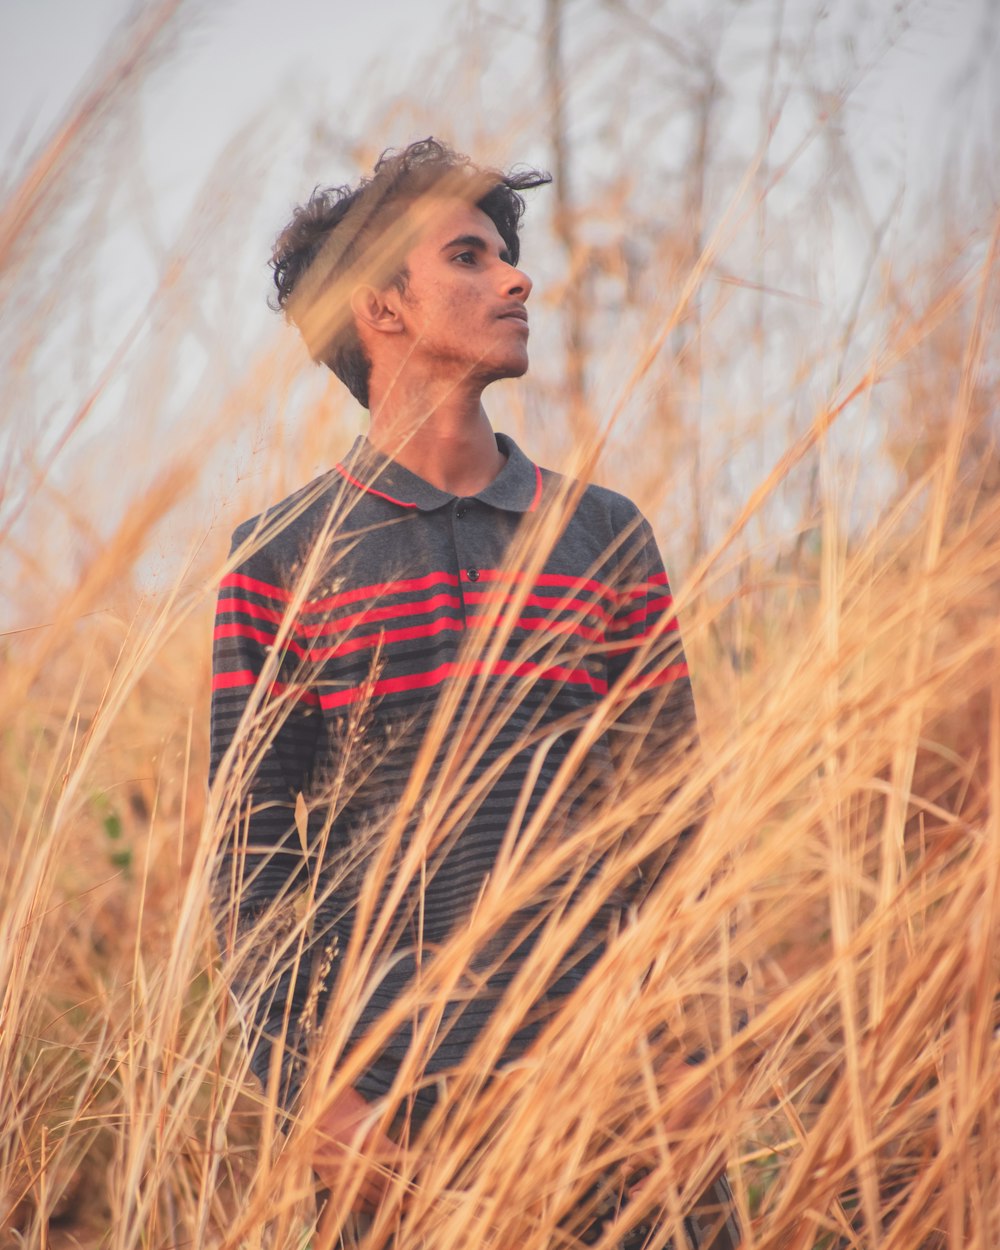 man in black and red crew neck shirt standing on brown grass field during daytime